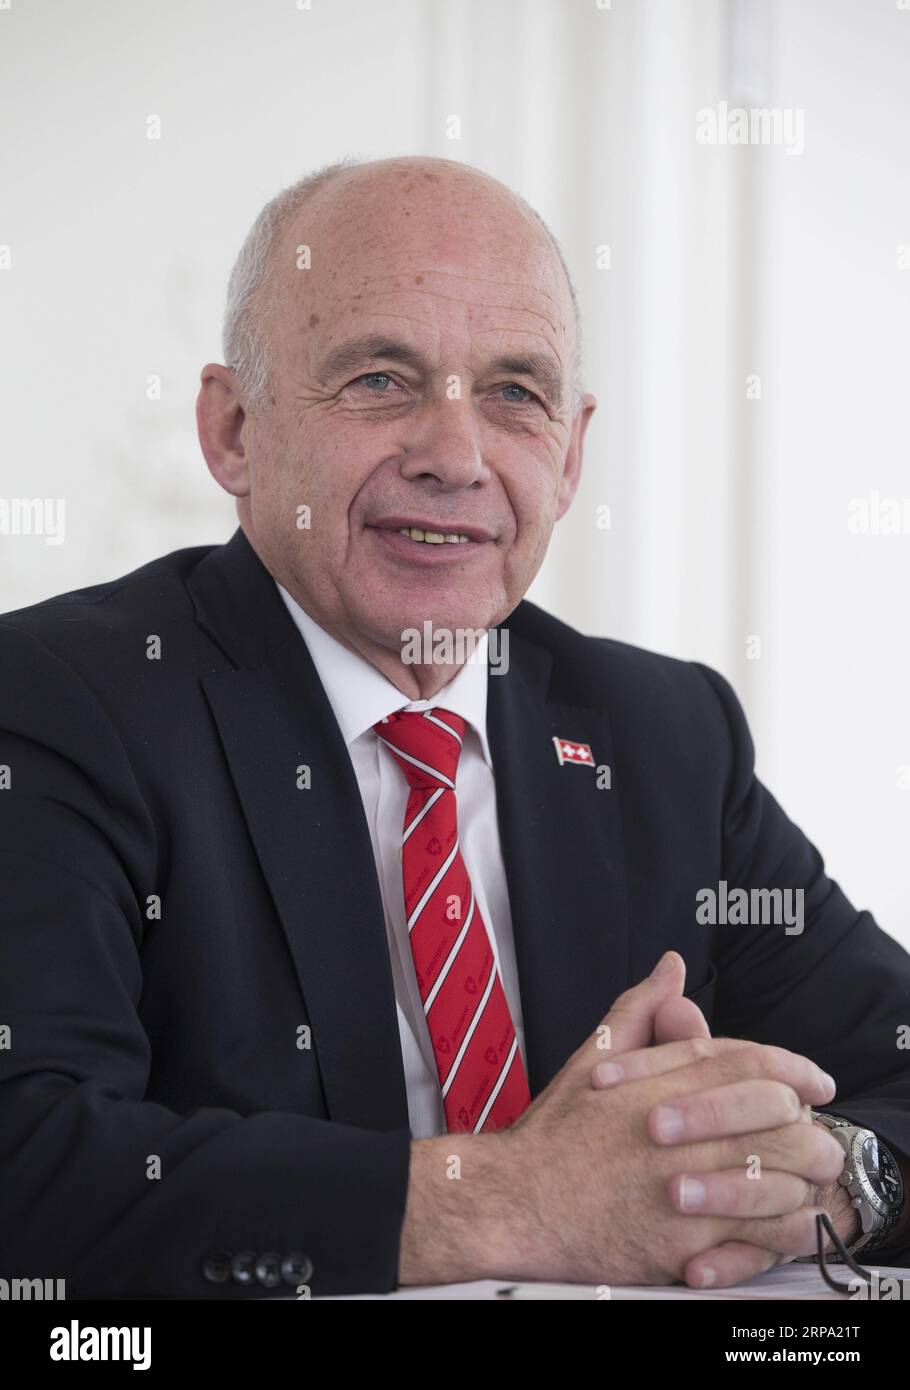 (190422) -- BERN, April 22, 2019 (Xinhua) -- President Ueli Maurer of the Swiss Confederation receives a joint interview with Chinese media in Bern, Switzerland, on April 16, 2019. China s Belt and Road Initiative (BRI) is a fundamental task crucial for generations to come, which, when implemented smoothly, will bring many benefits to both the economic development and the well-being of the people worldwide, Maurer has said. TO GO WITH Interview: BRI crucial for generations to come: President of Swiss Confederation (Xinhua/Xu Jinquan) SWITZERLAND-BERN-UELI MAURER-INTERVIEW PUBLICATIONxNOTxINxCH Stock Photo